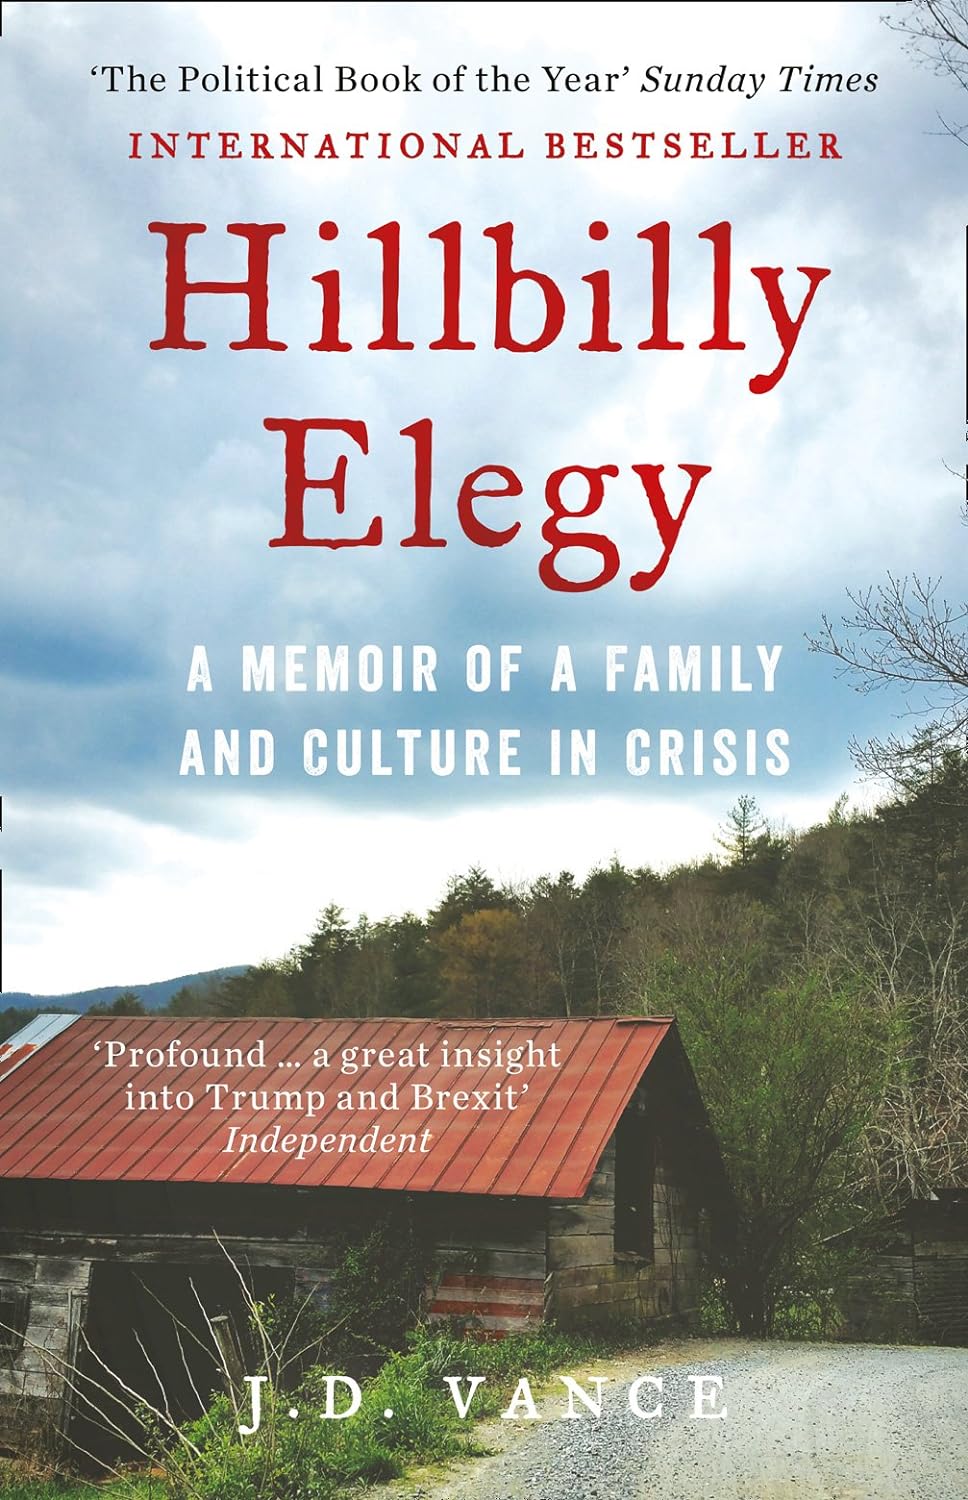 Hillbilly Elegy : A Memoir of a Family and Culture in Crisis (Paperback)